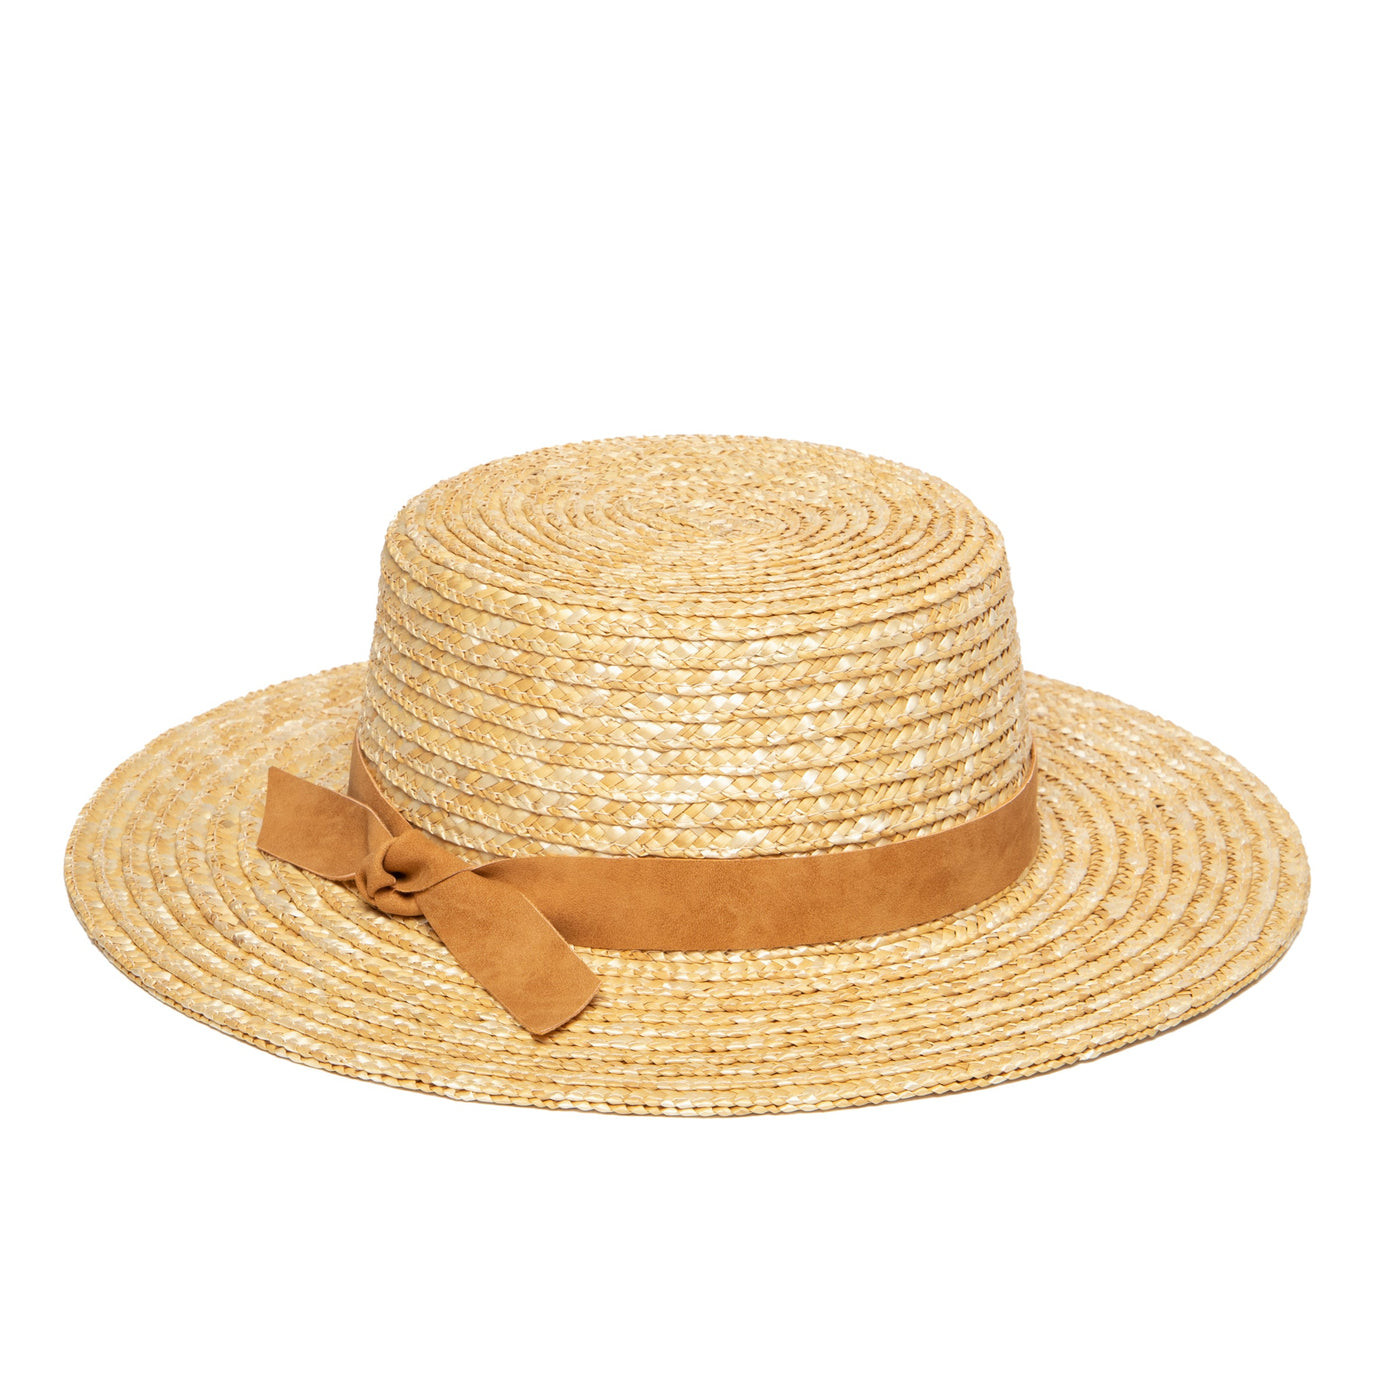 BOATER - Women's Wheat Straw Boater With Faux Leather Band